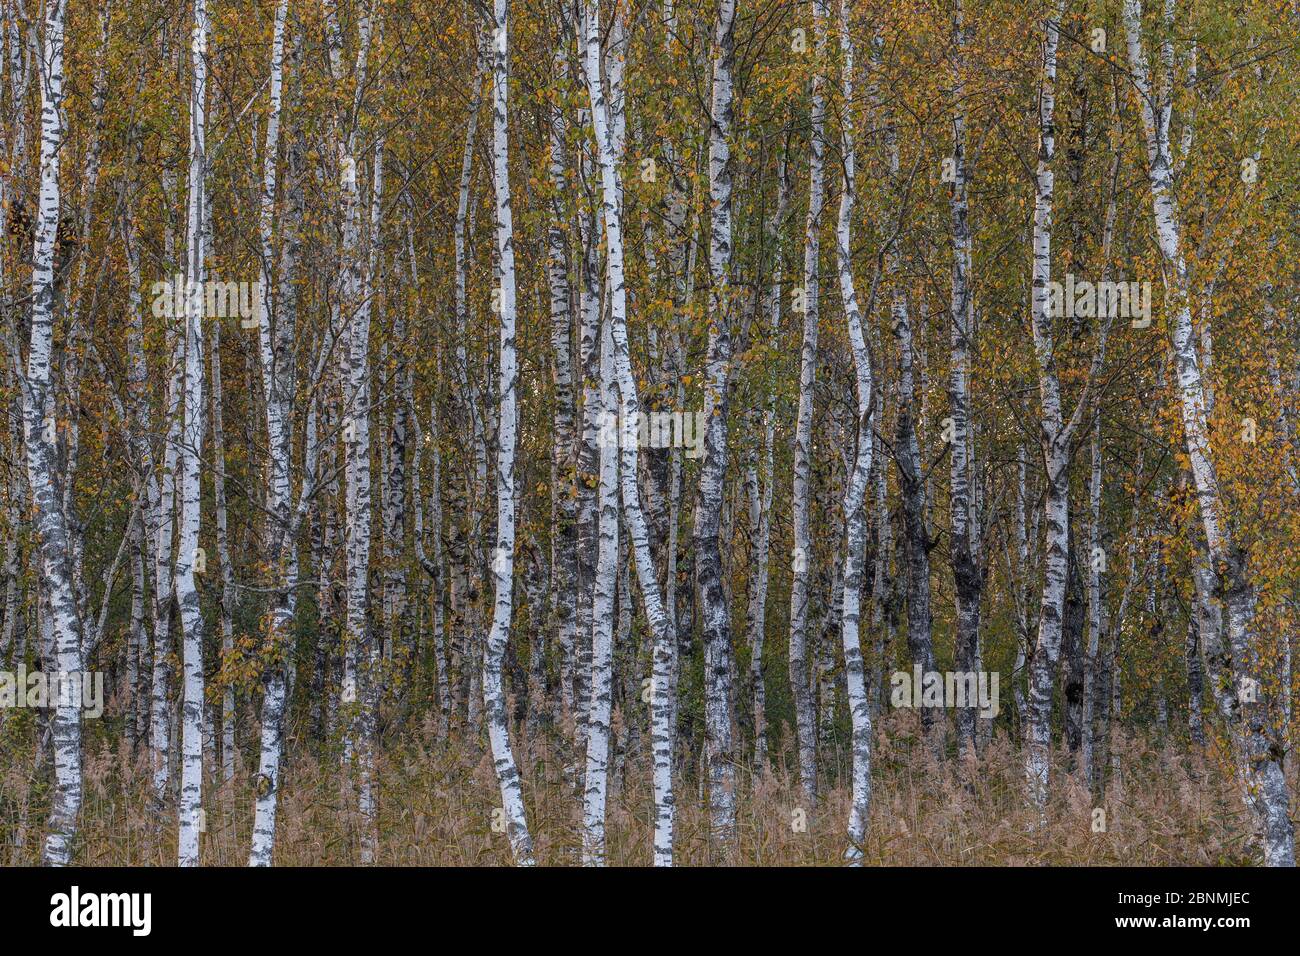 Birch trees (Betula sp) trunks in autumn, Federsee, Germany Stock Photo